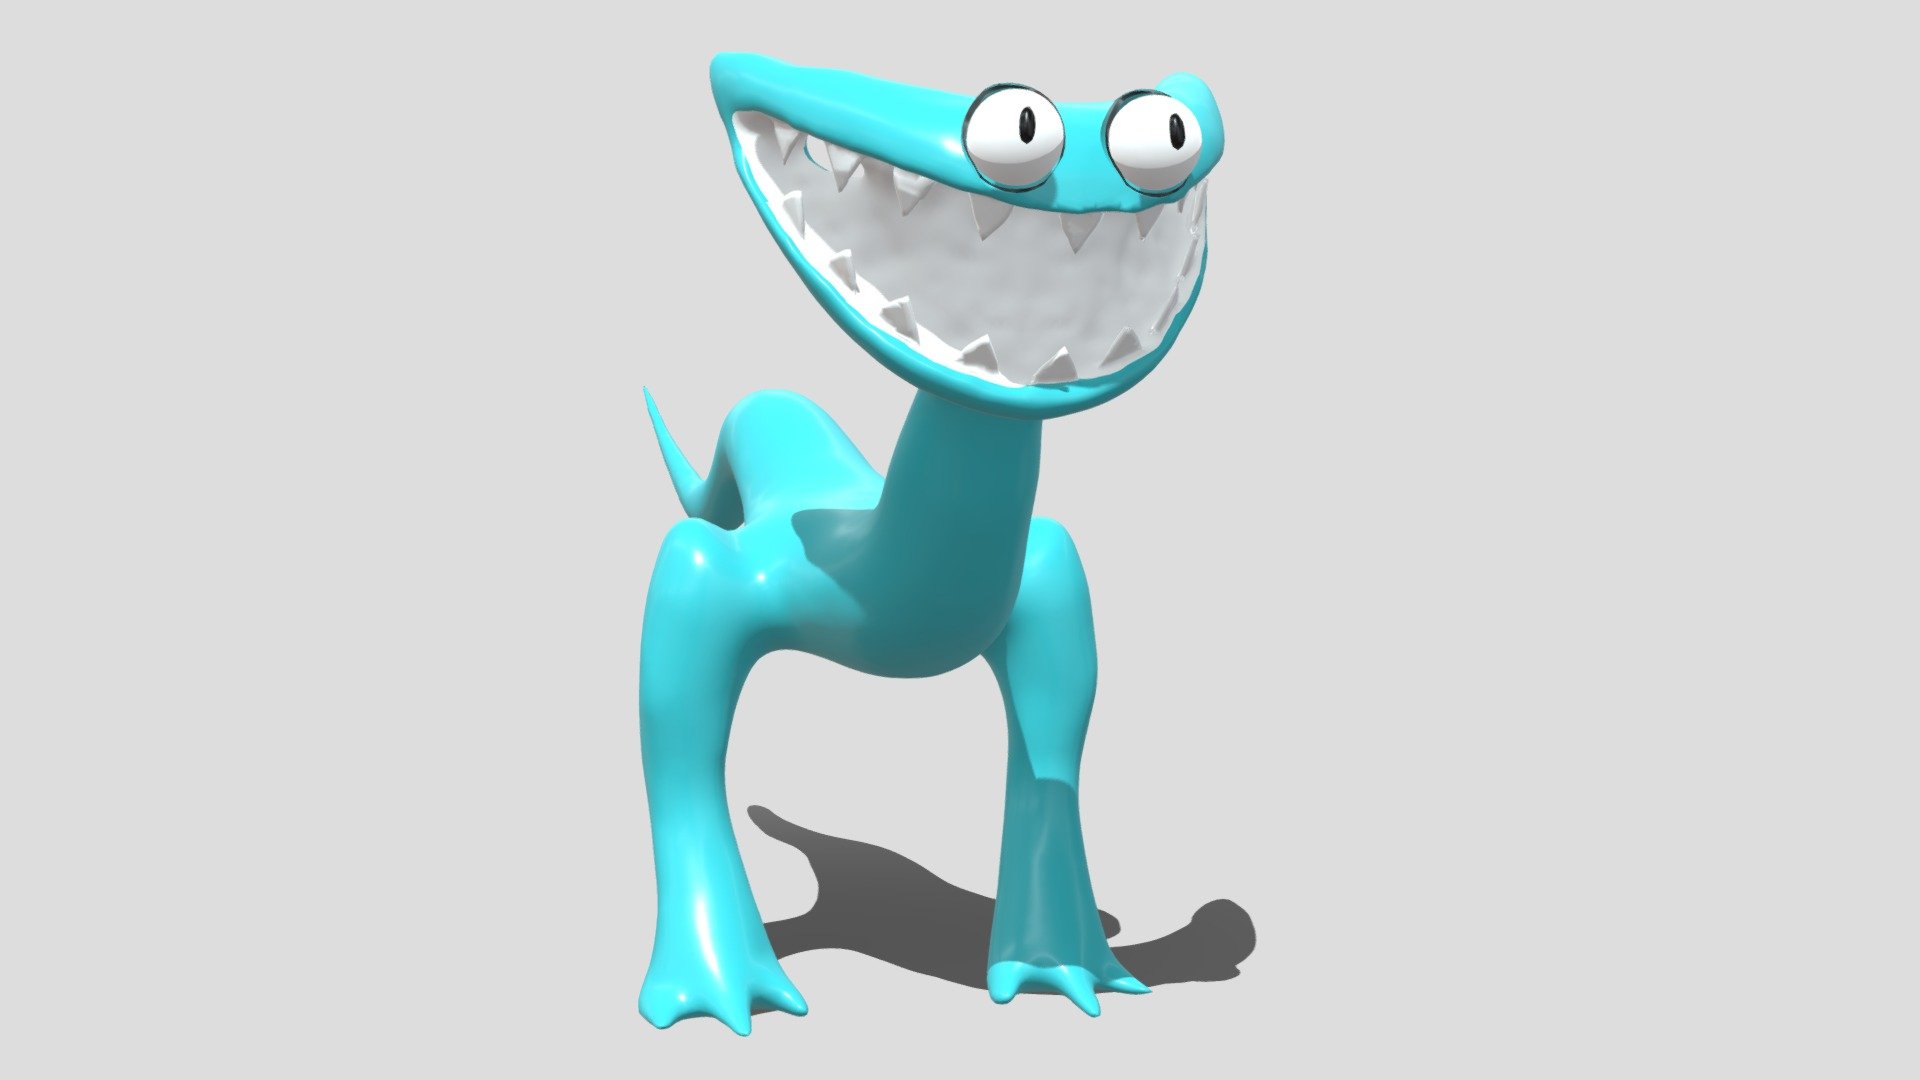 CYAN FROM RAINBOW FRIENDS CHAPTER 2 ROBLOX GAME V.2, 3D models download